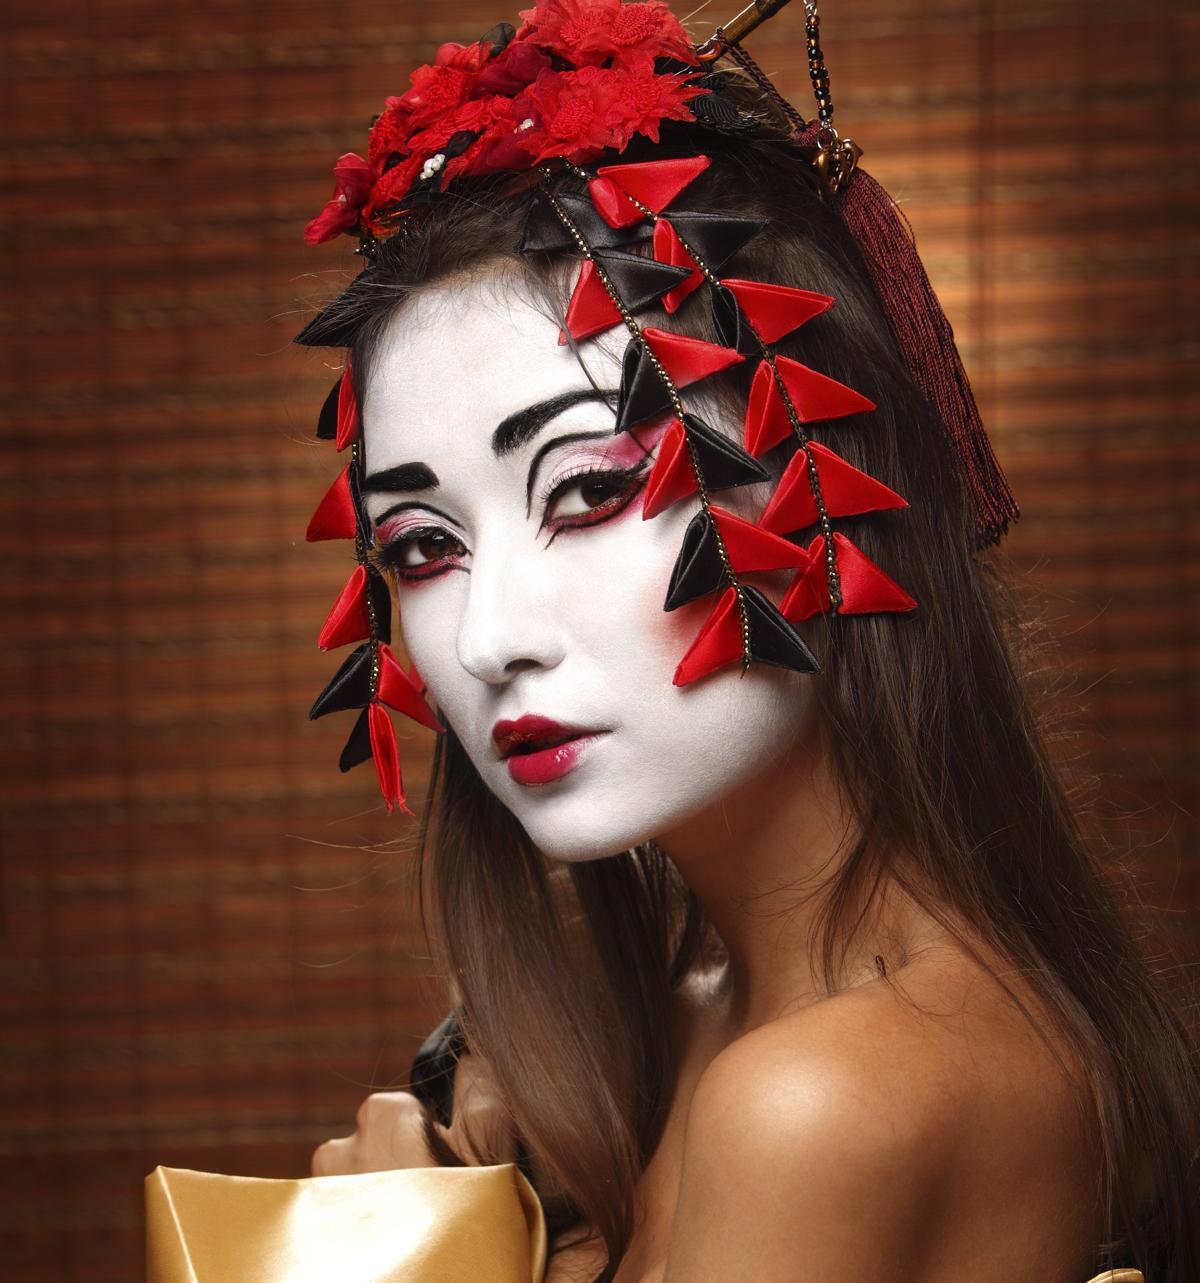 Easy DIY Makeup Ideas to Get the Perfect Geisha Look